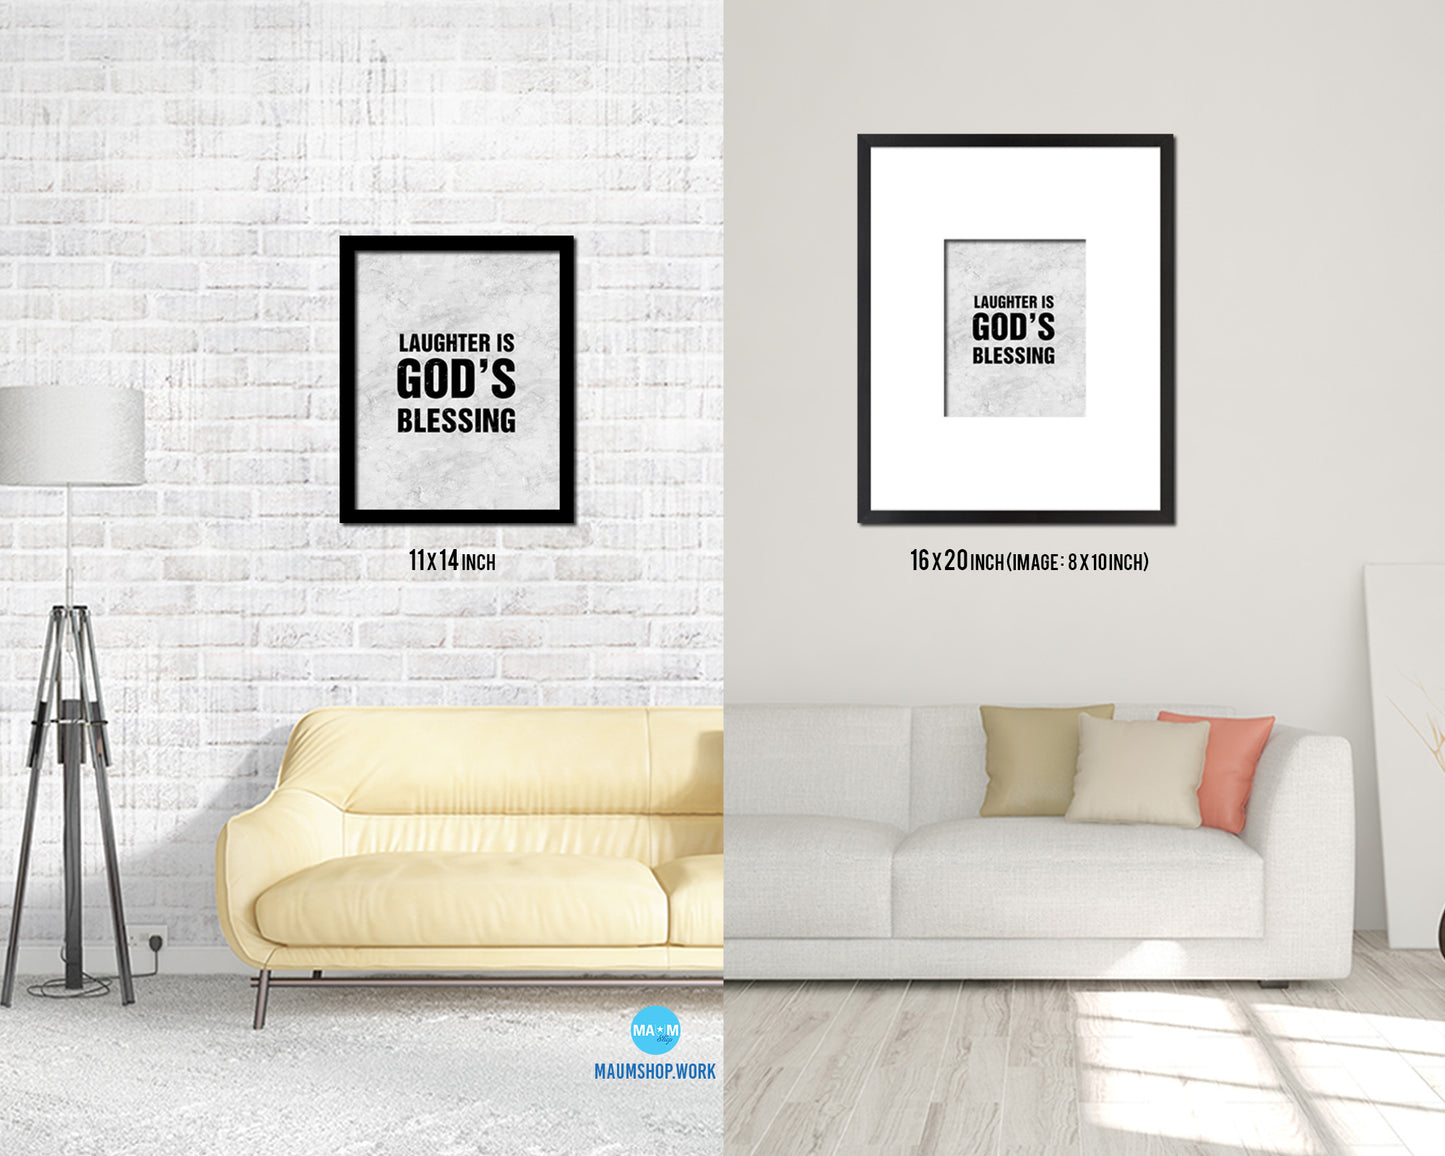 Laughter is God's blessing Quote Framed Print Wall Art Decor Gifts